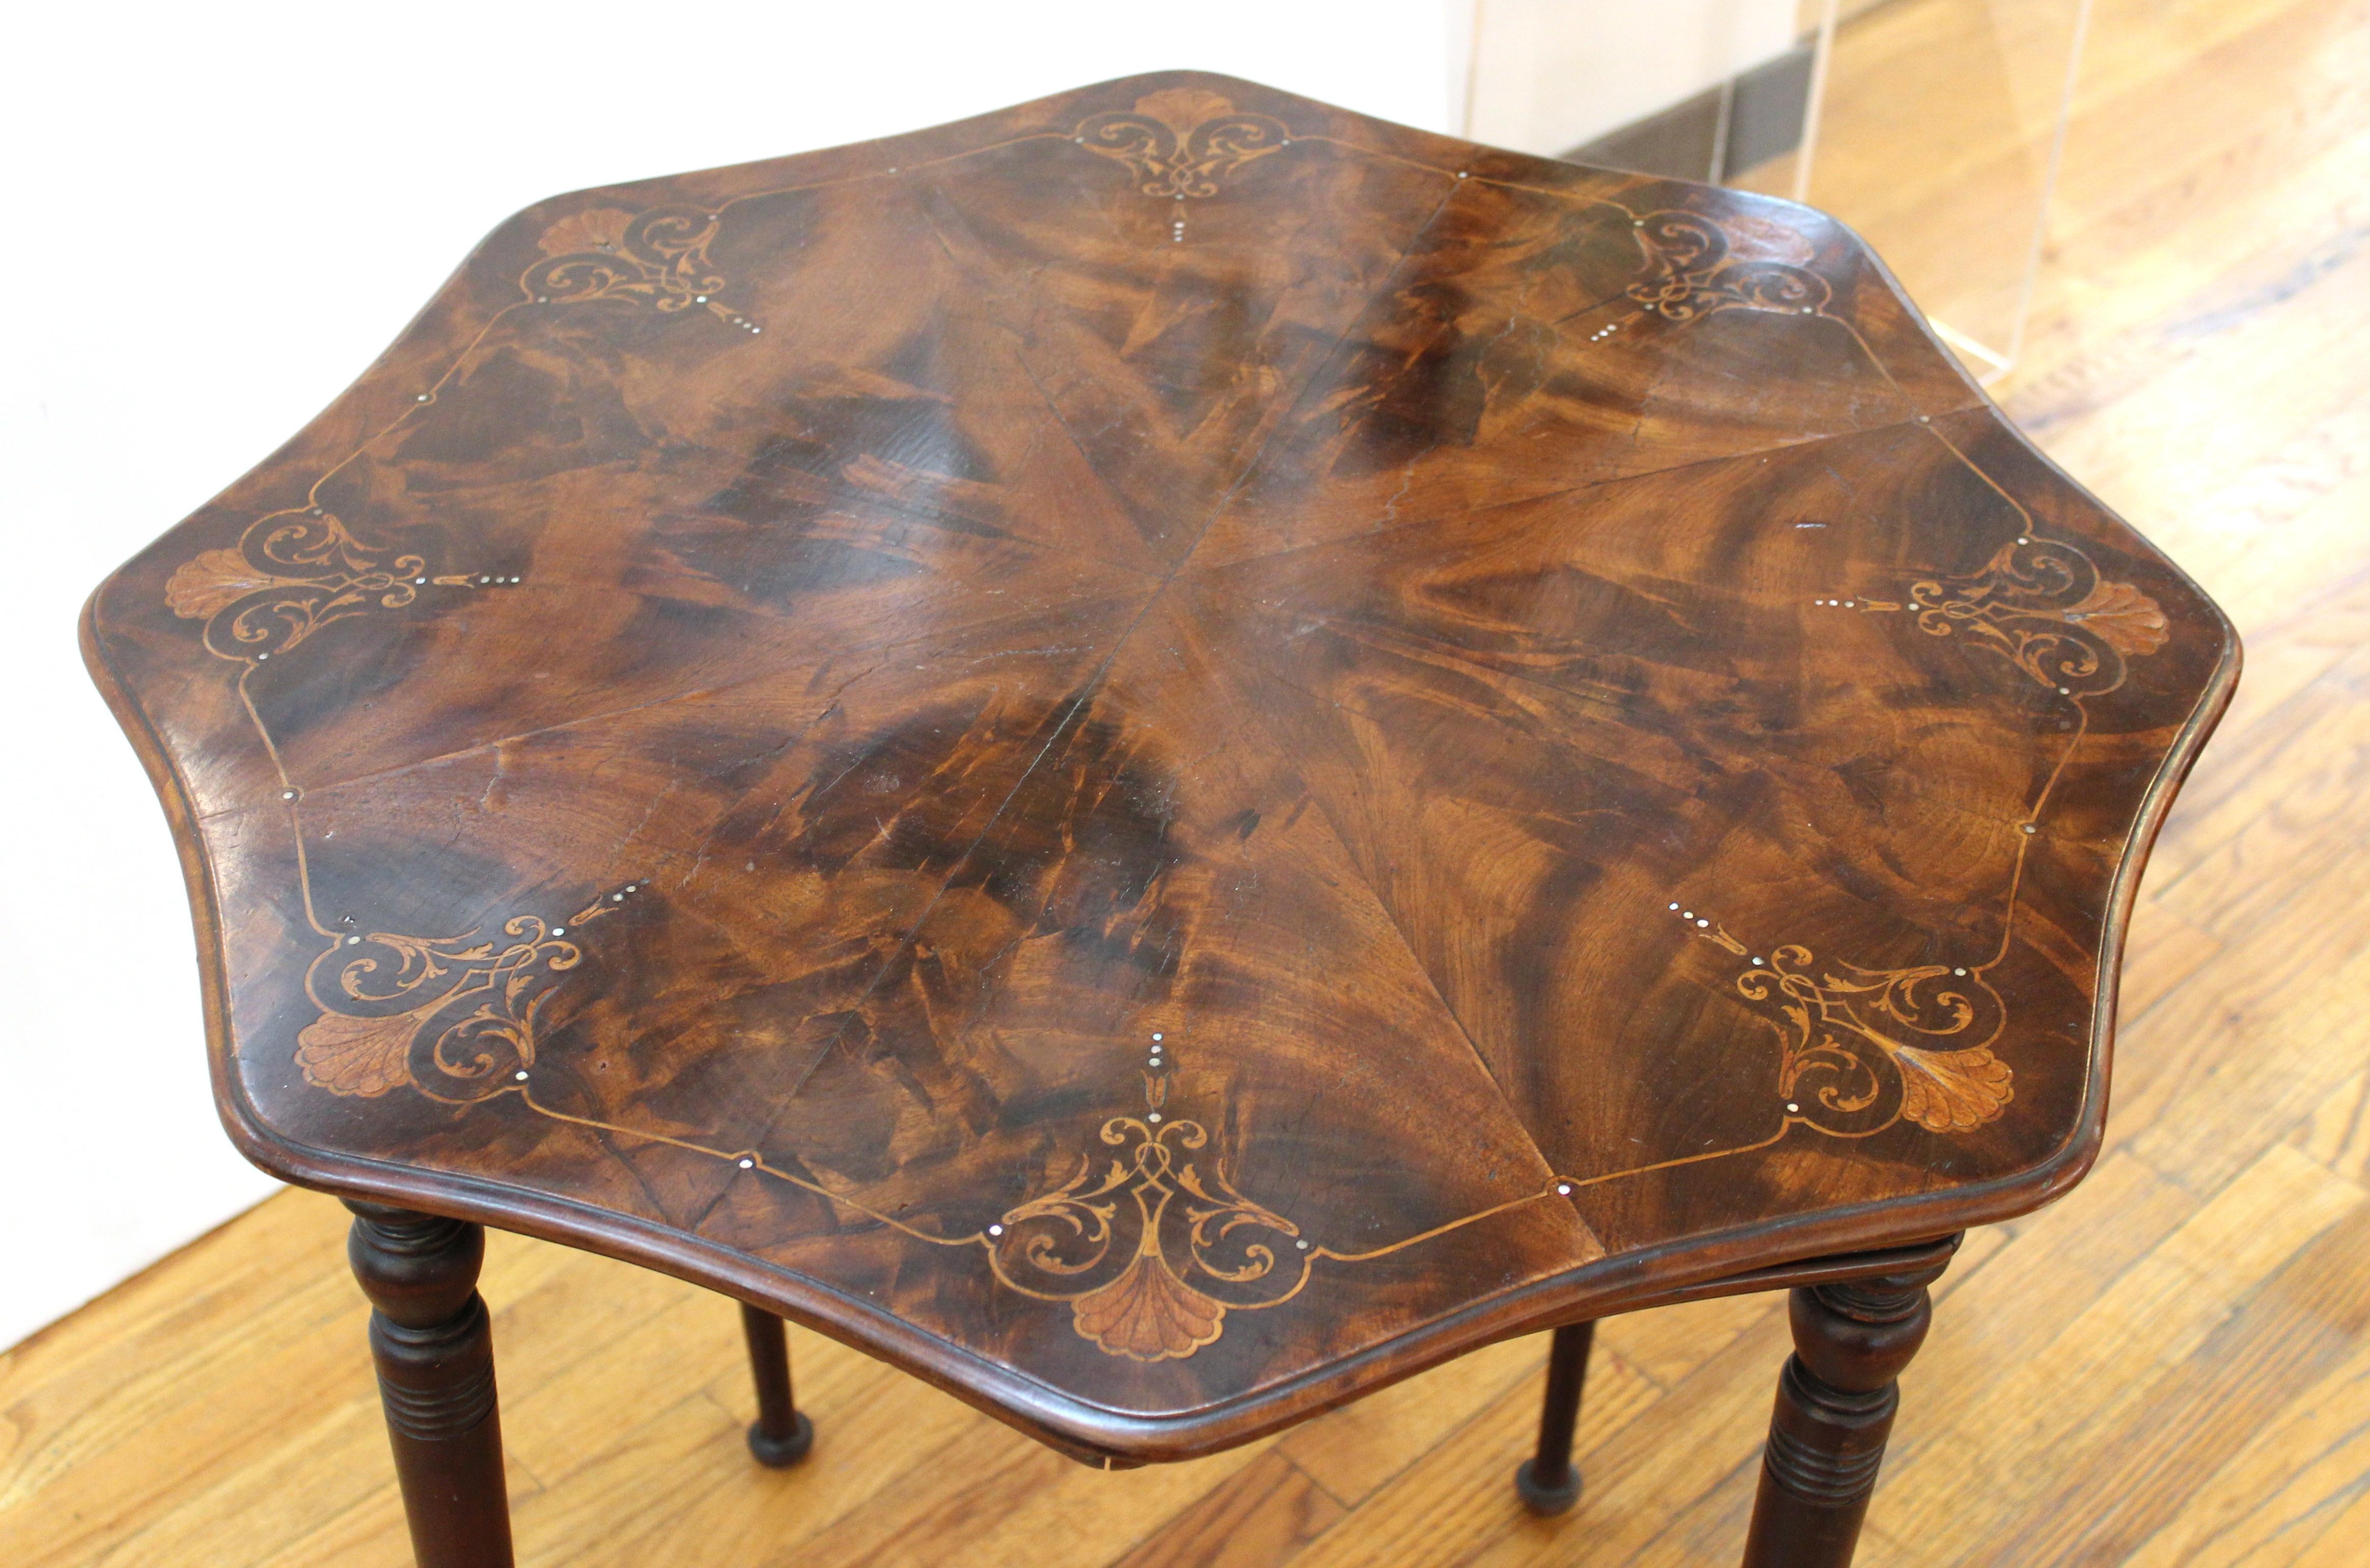 English Edwardian style parquetry center table or side table with mother of pearl inlay.